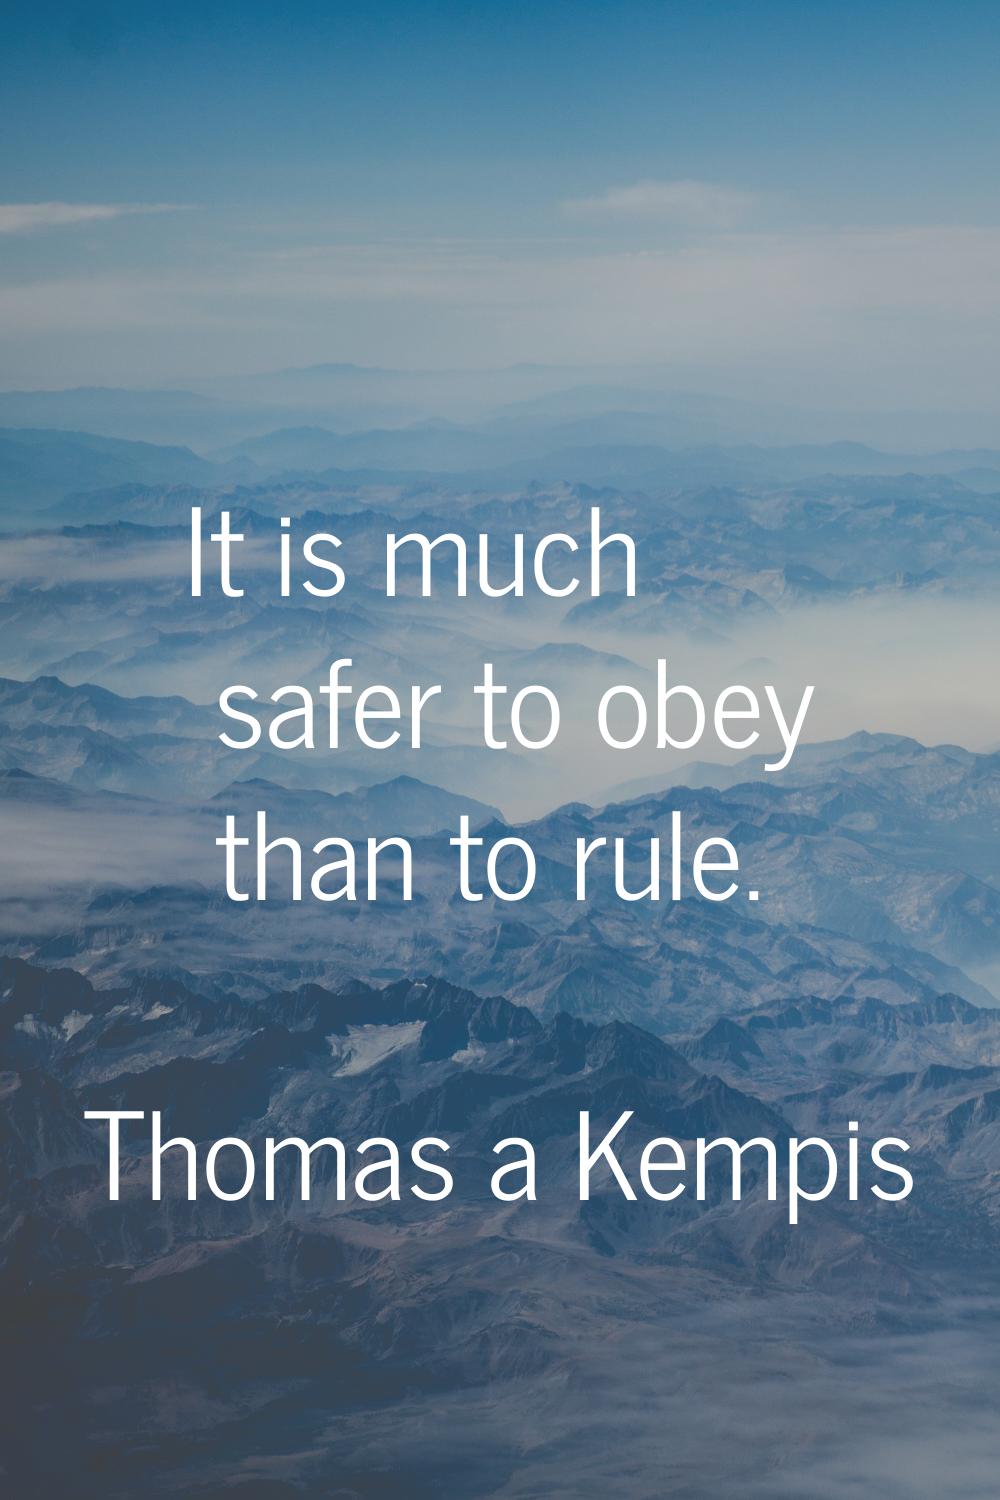 It is much safer to obey than to rule.